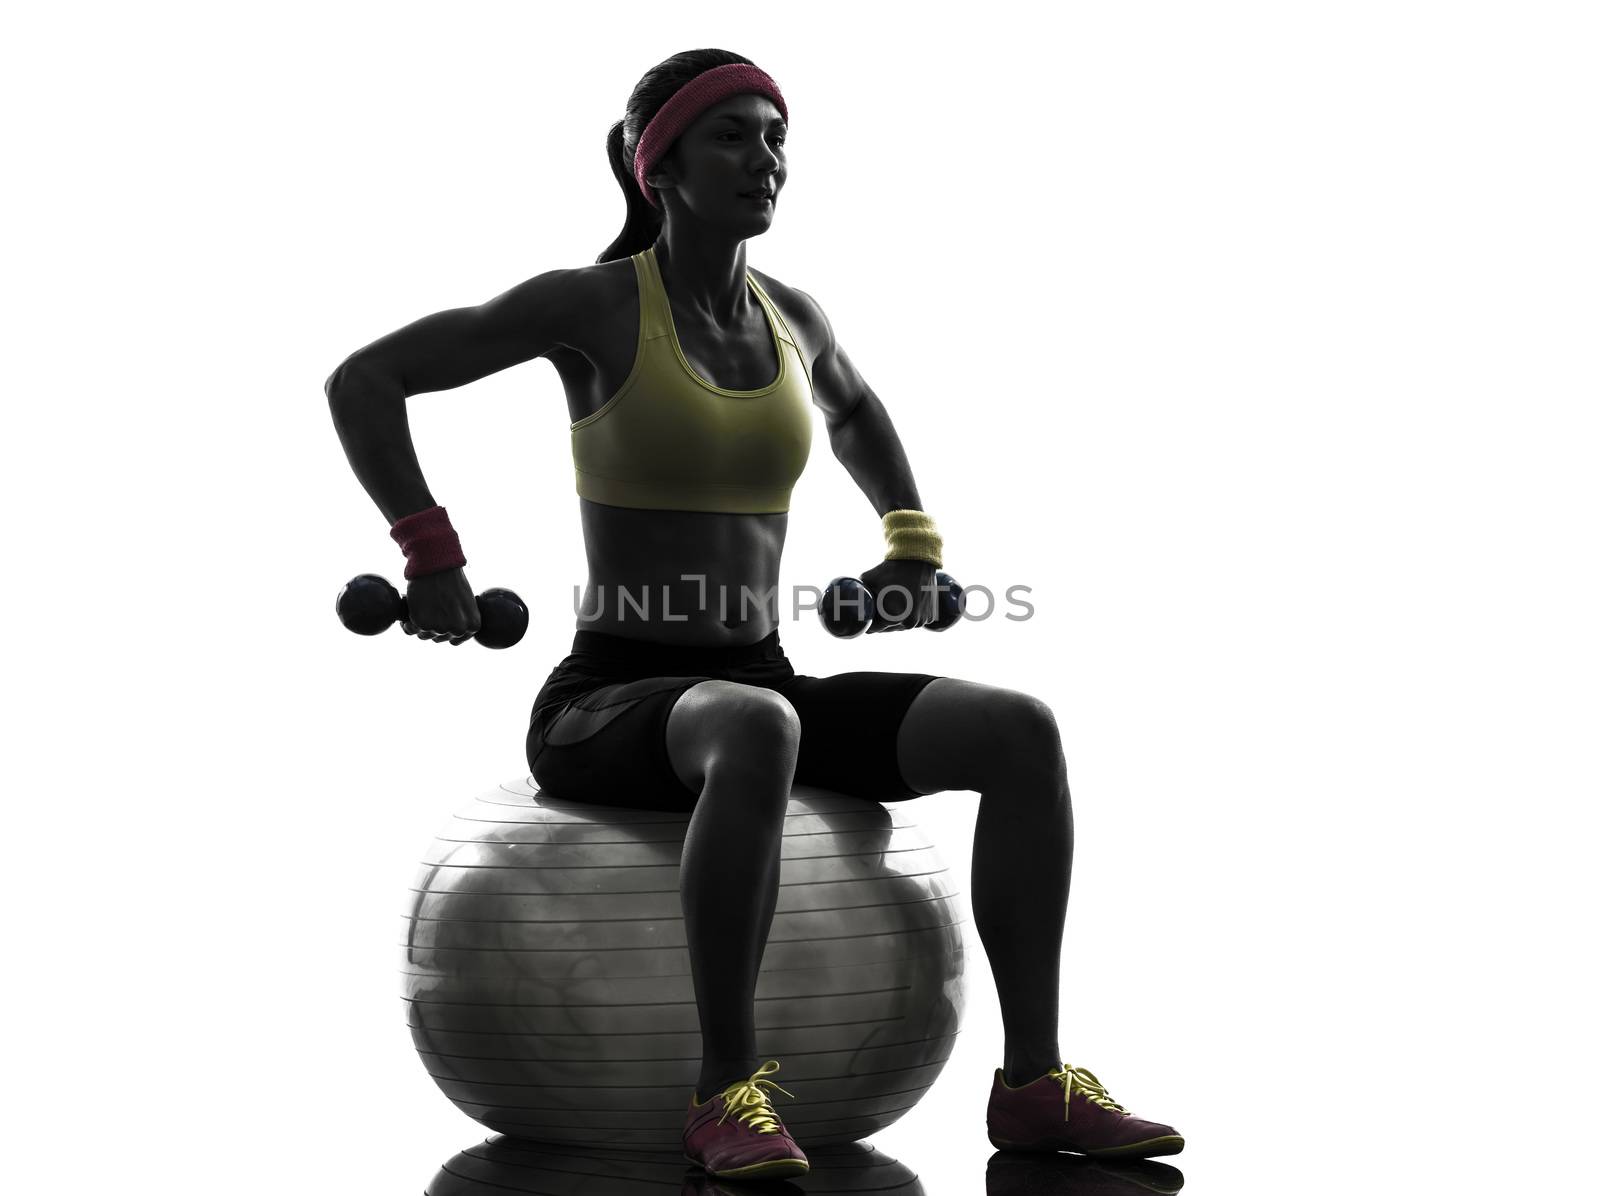 one woman exercising weight training on fitness ball in silhouette on white background